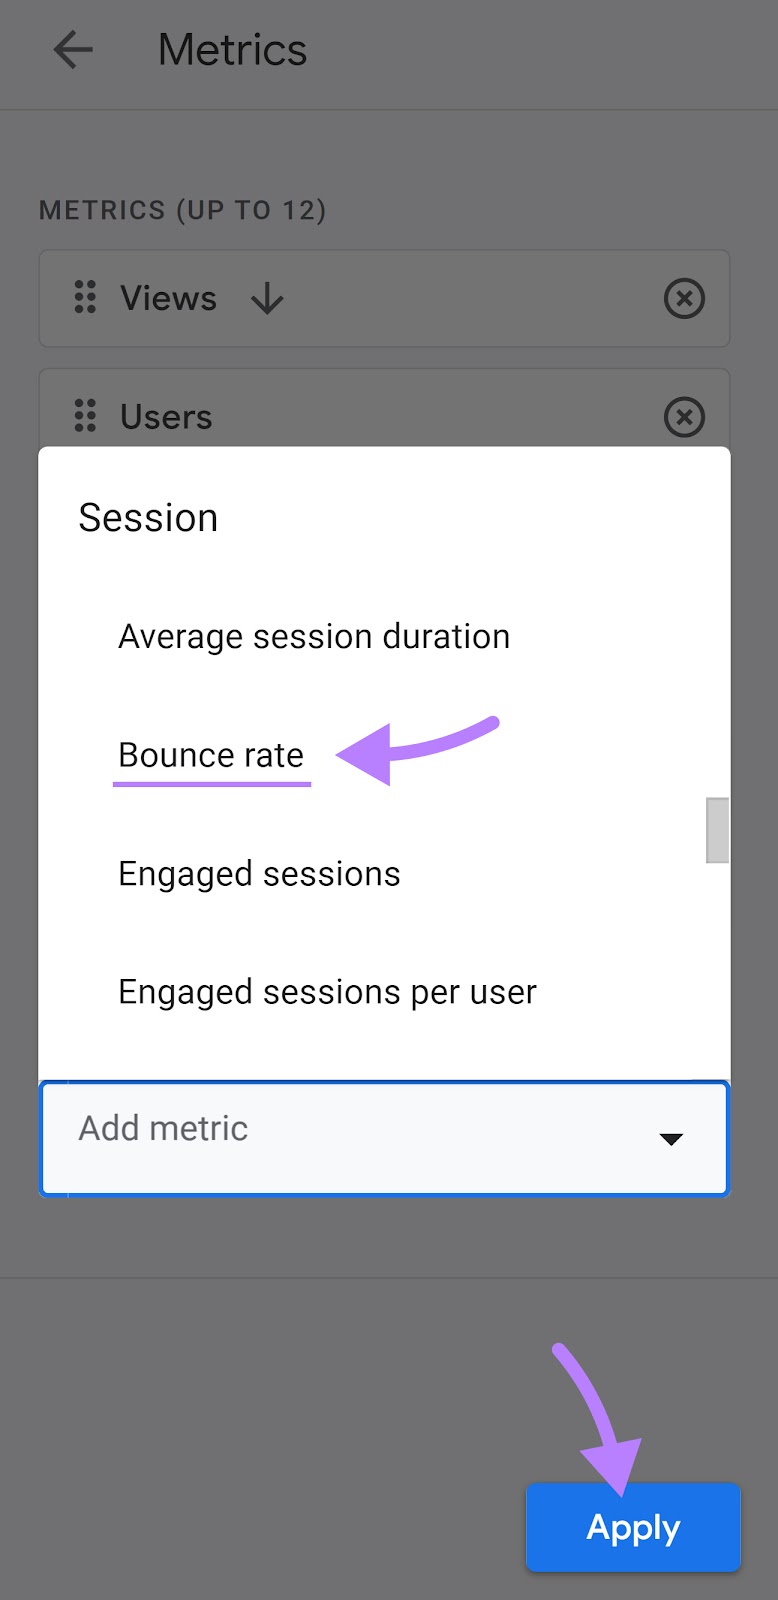 “Bounce rate" selected from the "Add metric" drop-down menu